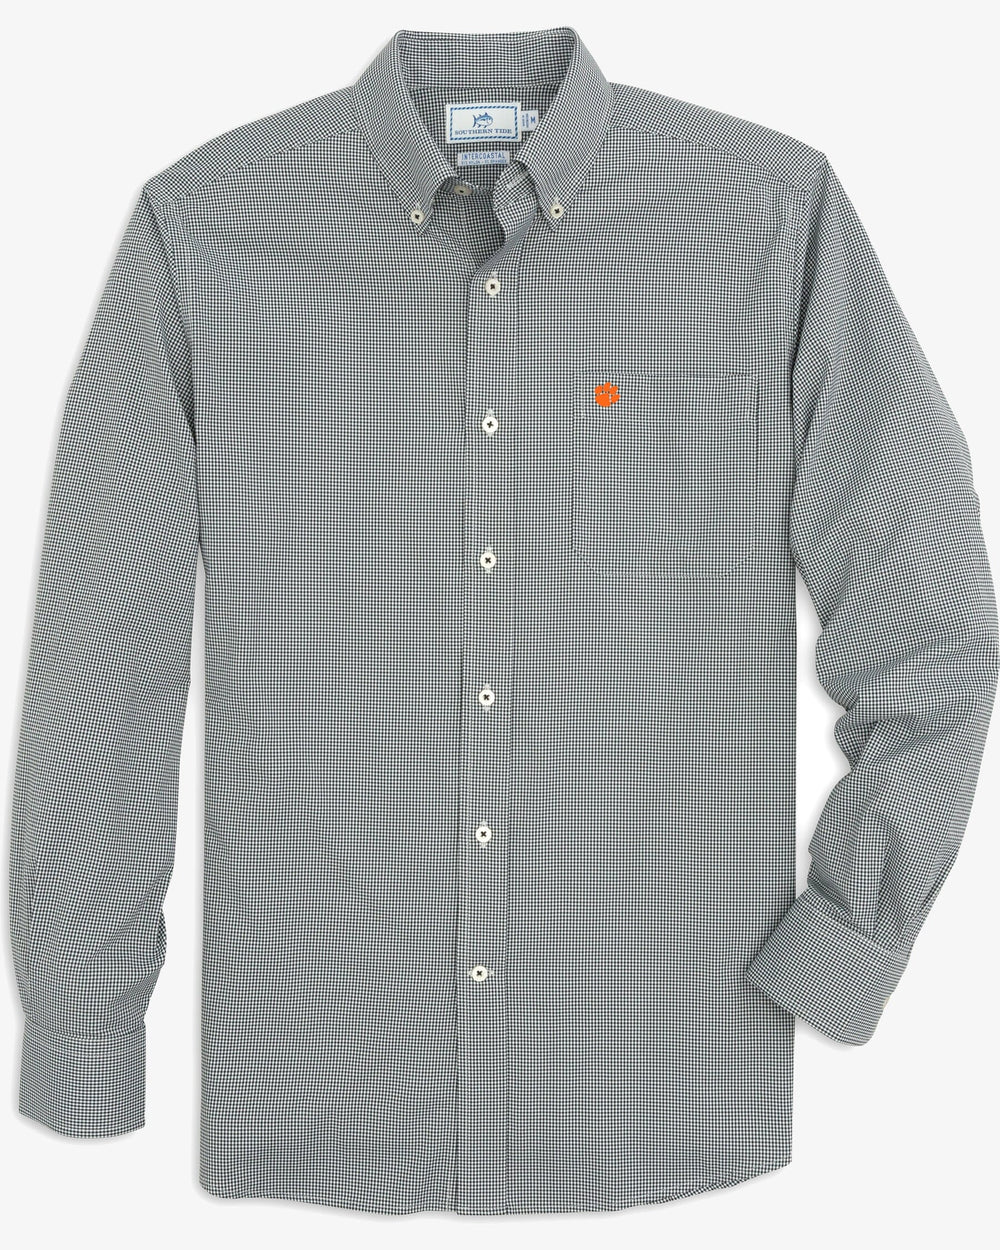 The front view of the Clemson Tigers Gingham Button Down Shirt by Southern Tide - Black